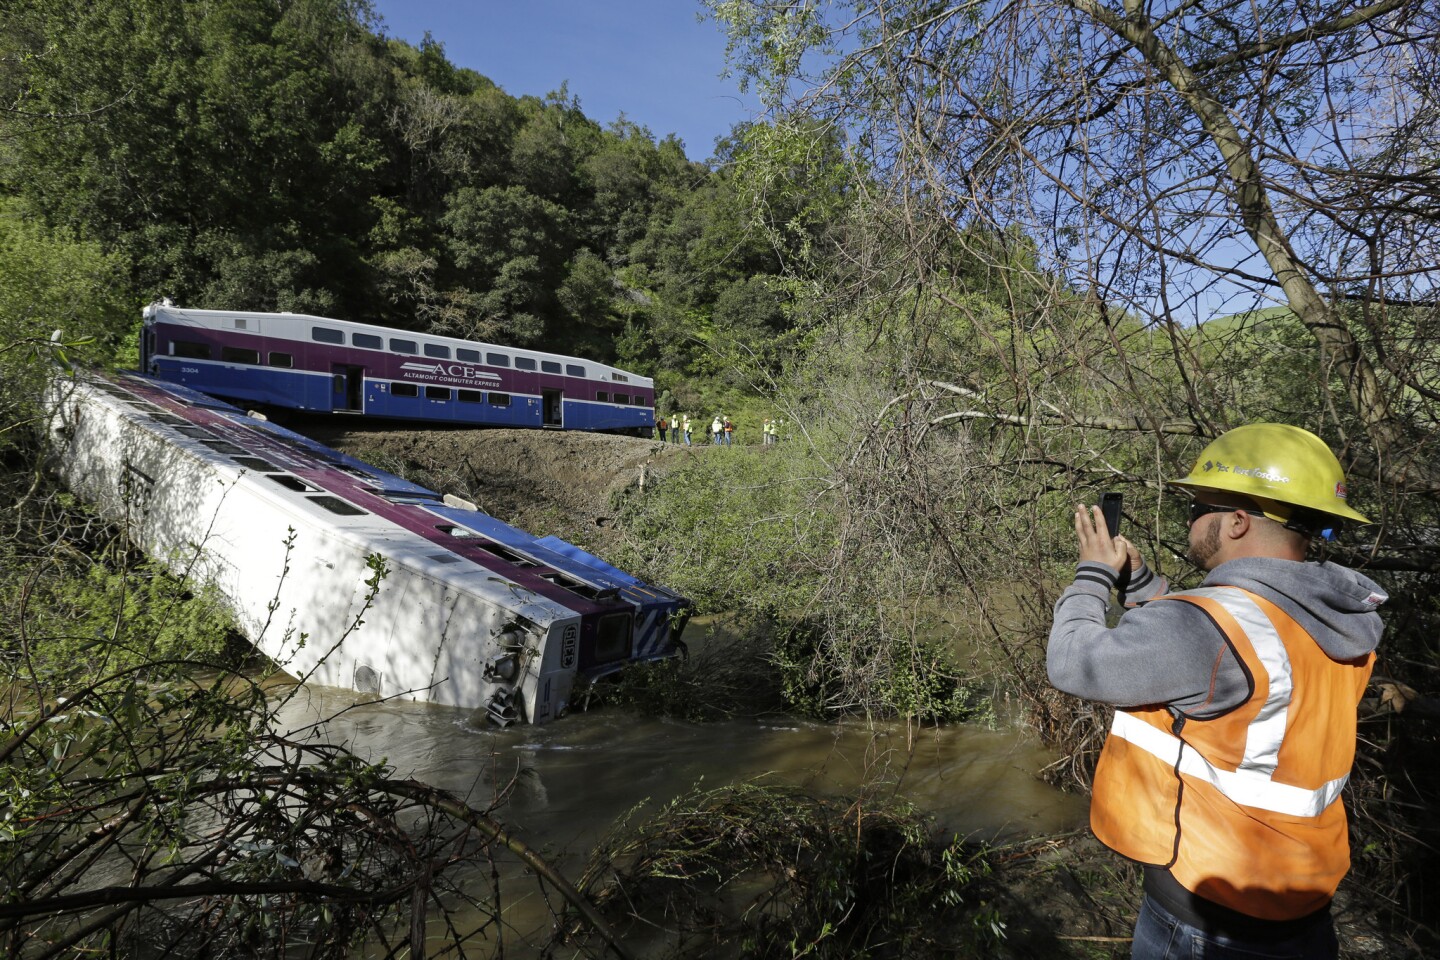 Workers investigate the scene of a derailed Altamont Corridor Express train Tuesday in Sunol, Calif. A Union Pacific spokesman says a mudslide most likely caused a commuter train derailment in Northern California that sent its leading car plunging into a swollen creek, injuring several people.